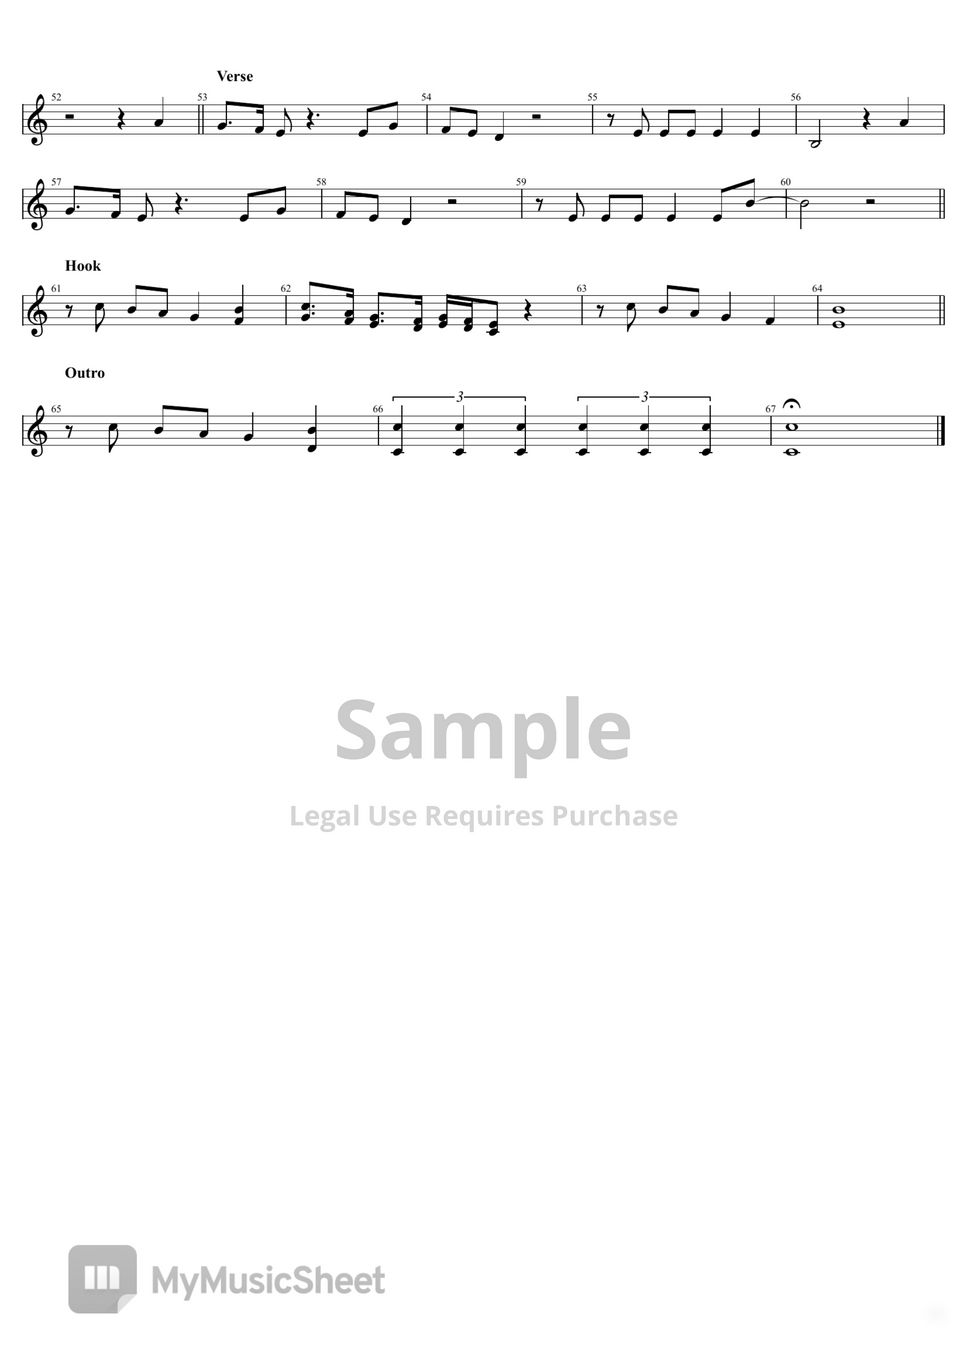 The Beatles - I Want To Hold Your Hand (Score for "C Key" instruments) by EMST